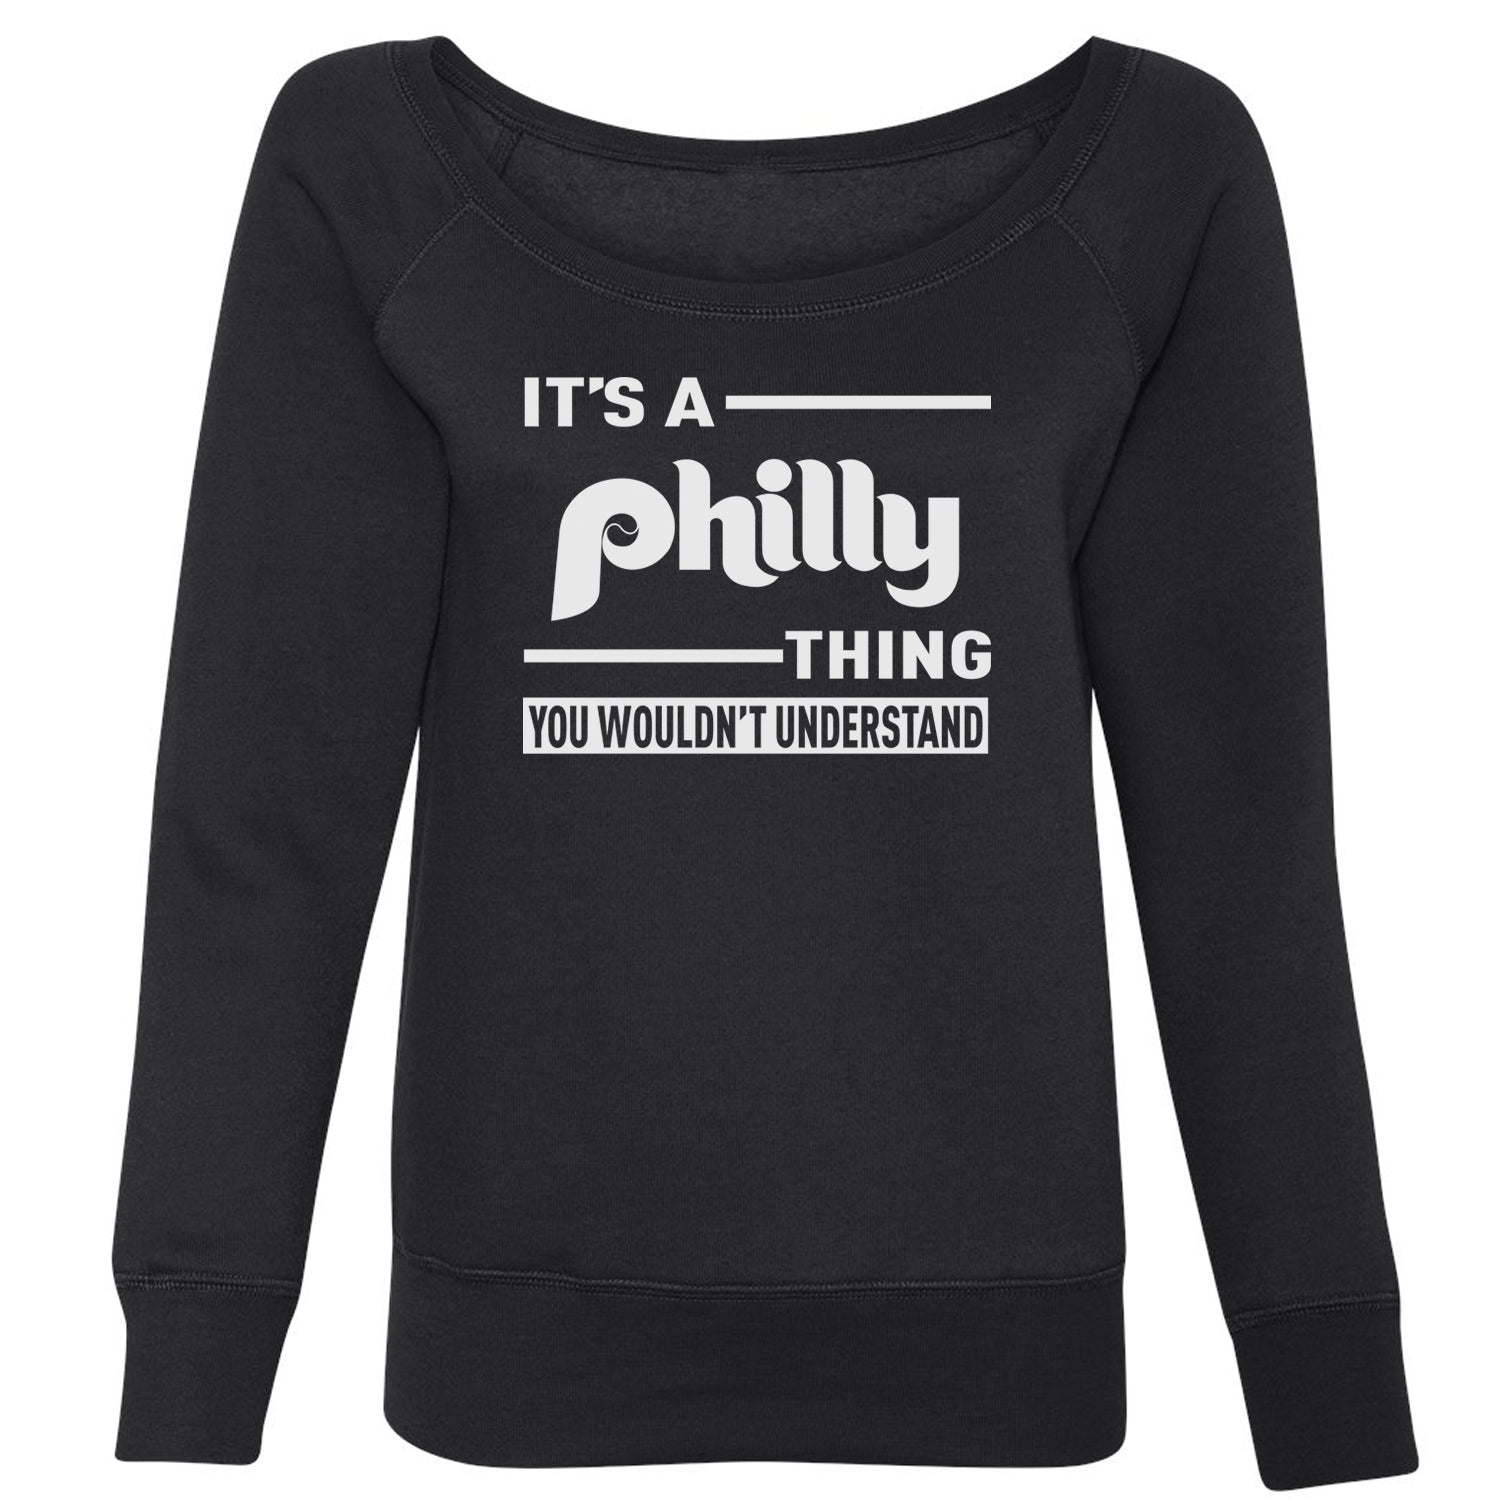 It's A Philly Thing, You Wouldn't Understand Slouchy Off Shoulder Oversized Sweatshirt baseball, filly, football, jawn, morgan, Philadelphia, philli by Expression Tees